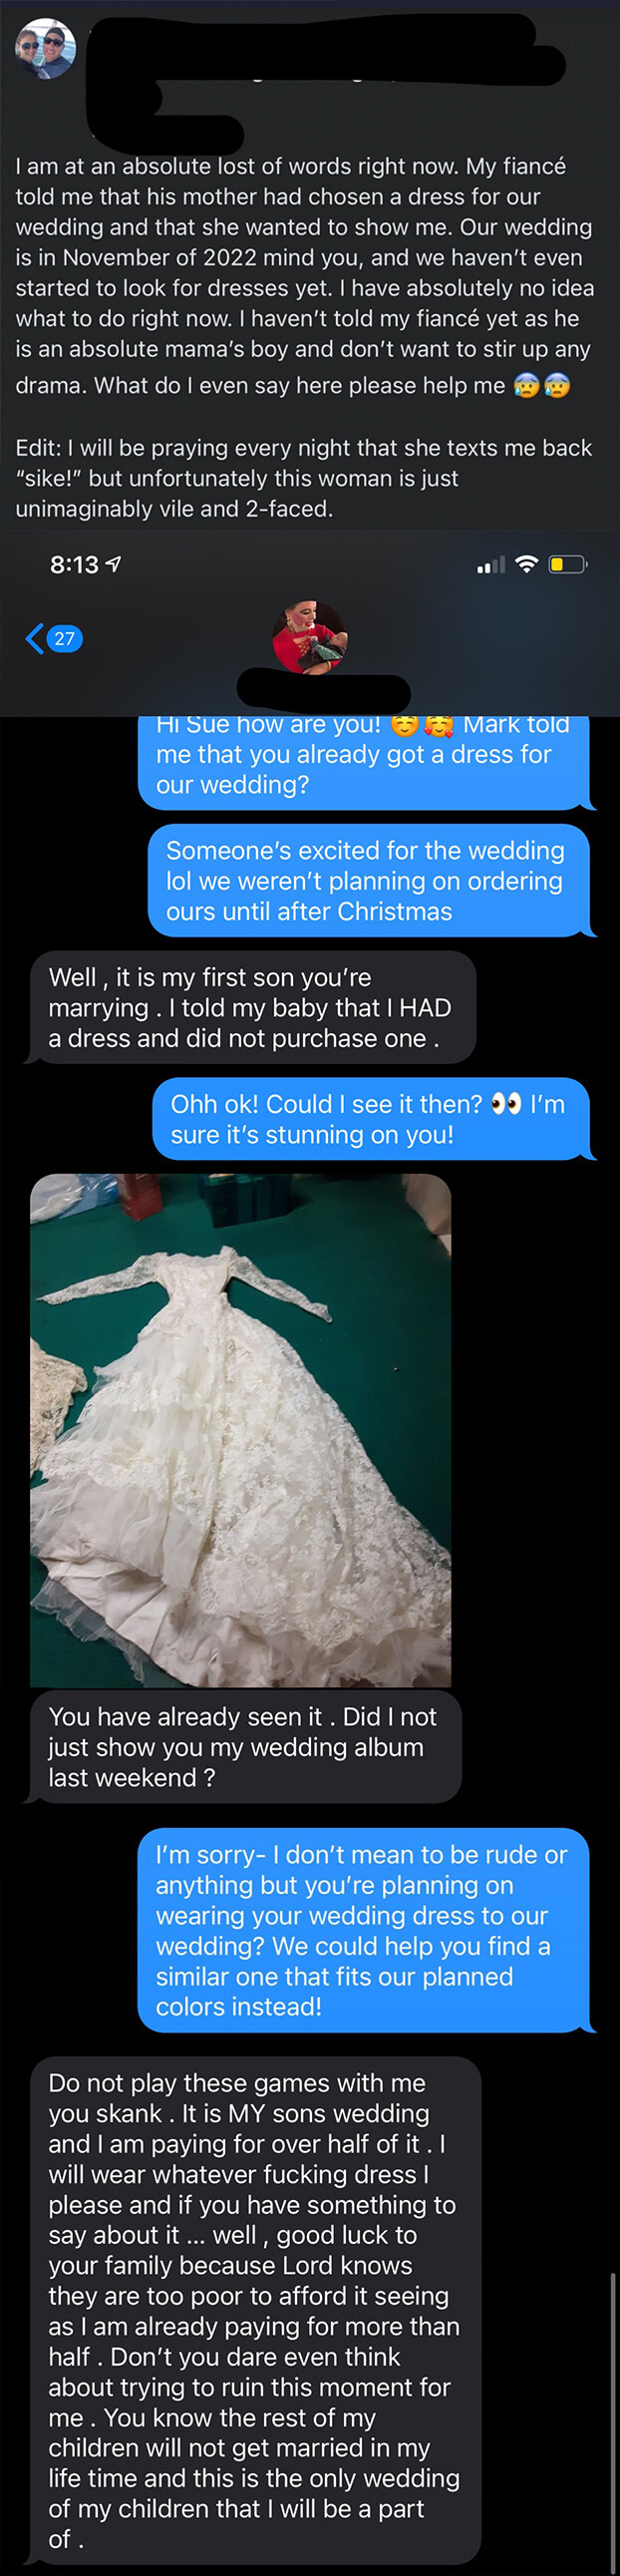 The bride asks the mother-in-law what dress she&#x27;s wearing, the MIL texts a picture of her old wedding dress, and when the bridge suggests they find her another dress, the MIL says &quot;do not play these games with me skank&quot;